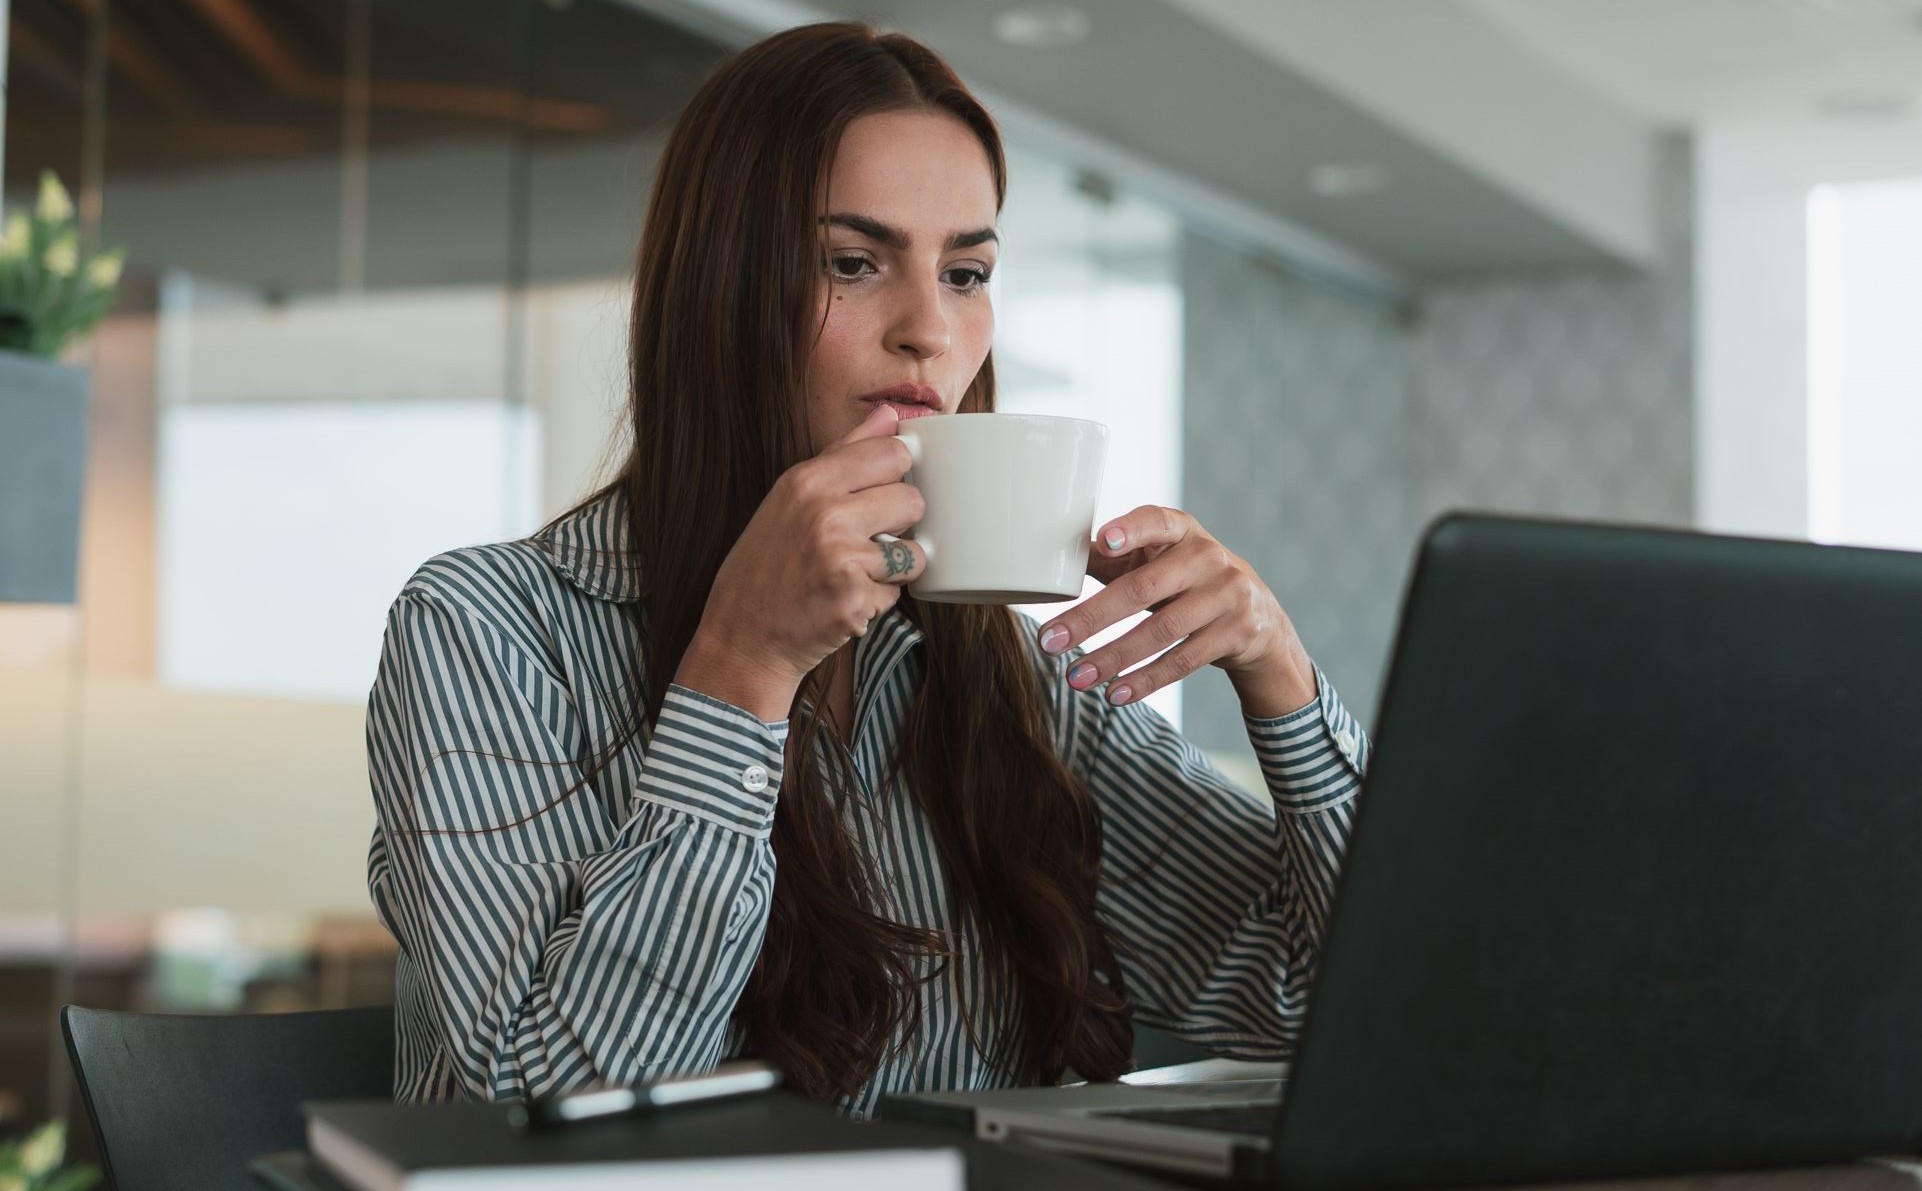 business woman drinking a coffee while looking at her computer screen